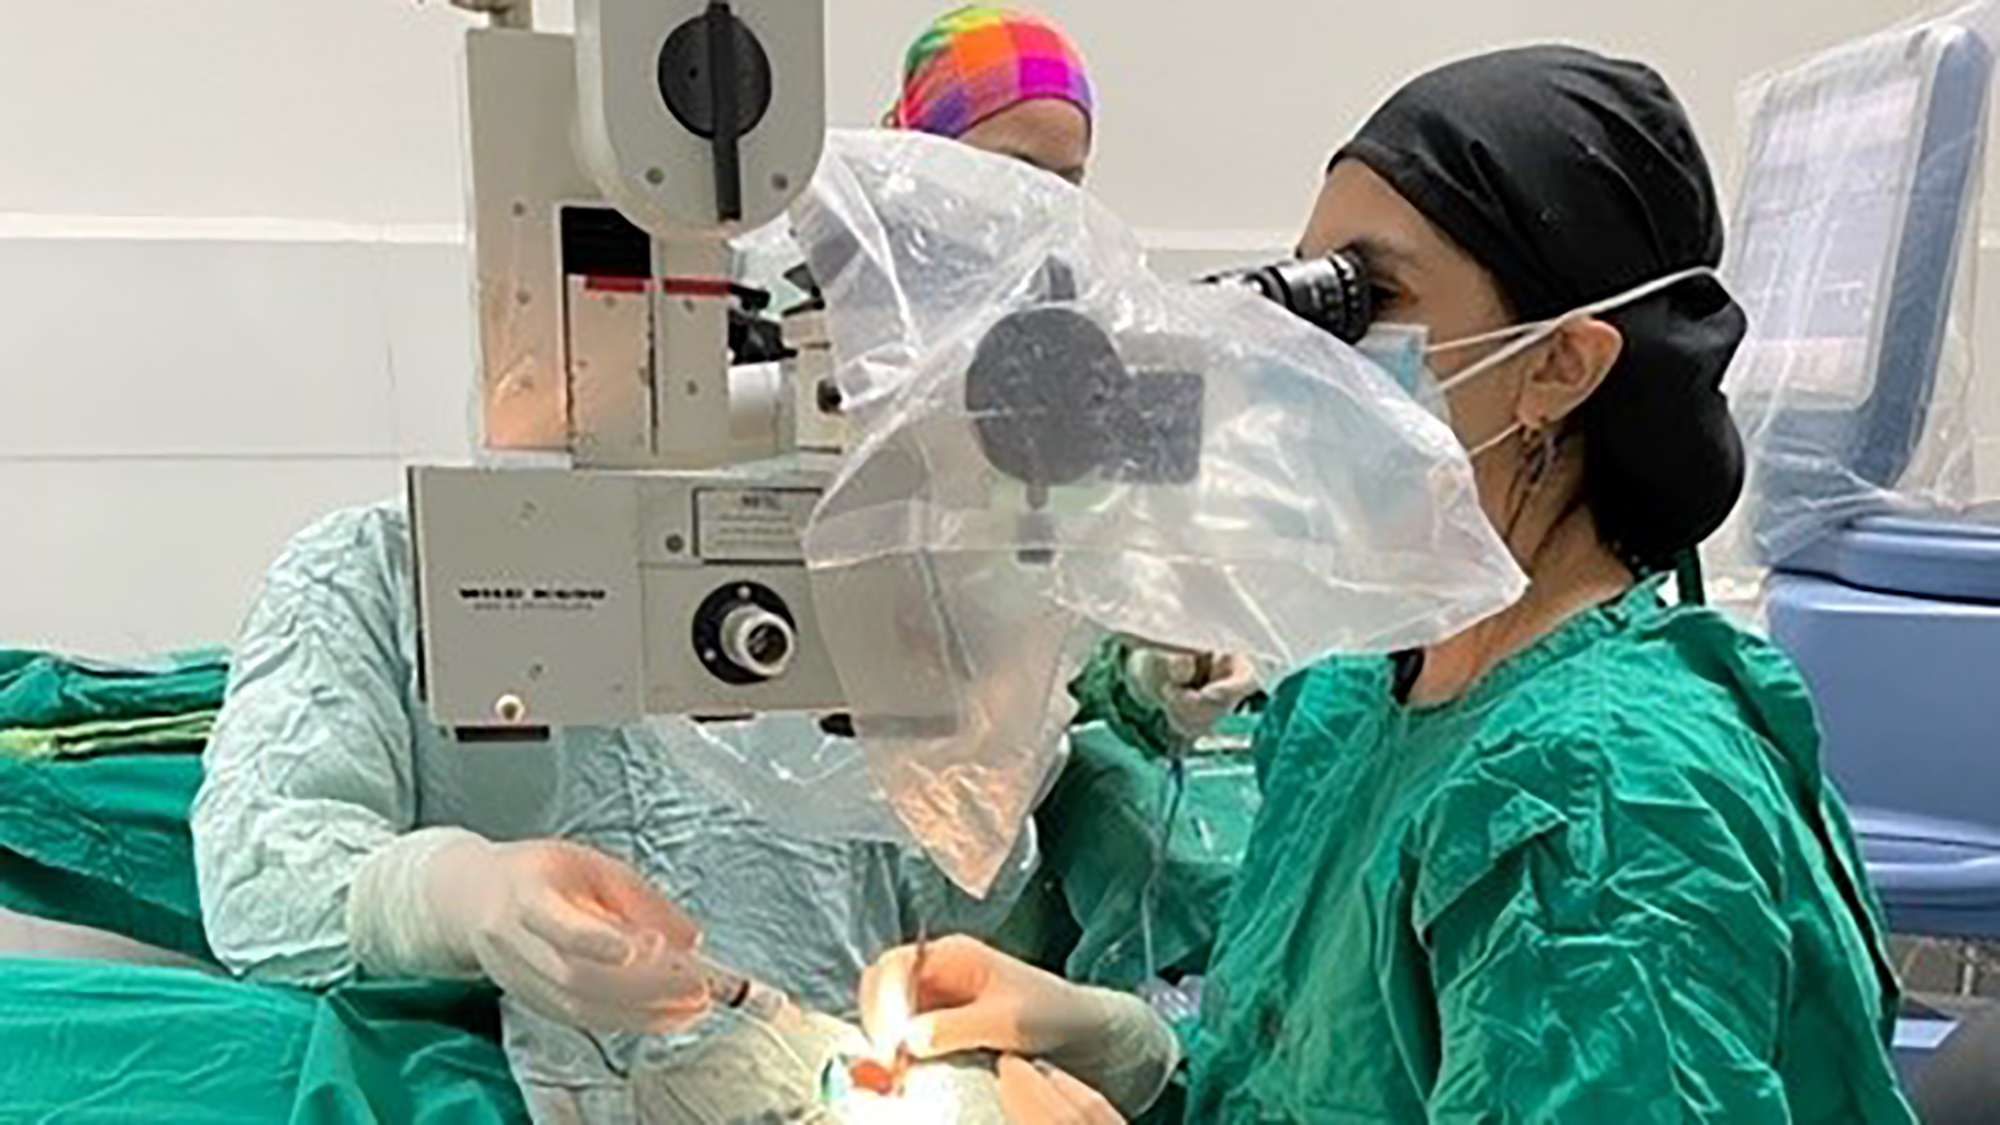 fully masked and suited-up surgeon conducting eye surgery